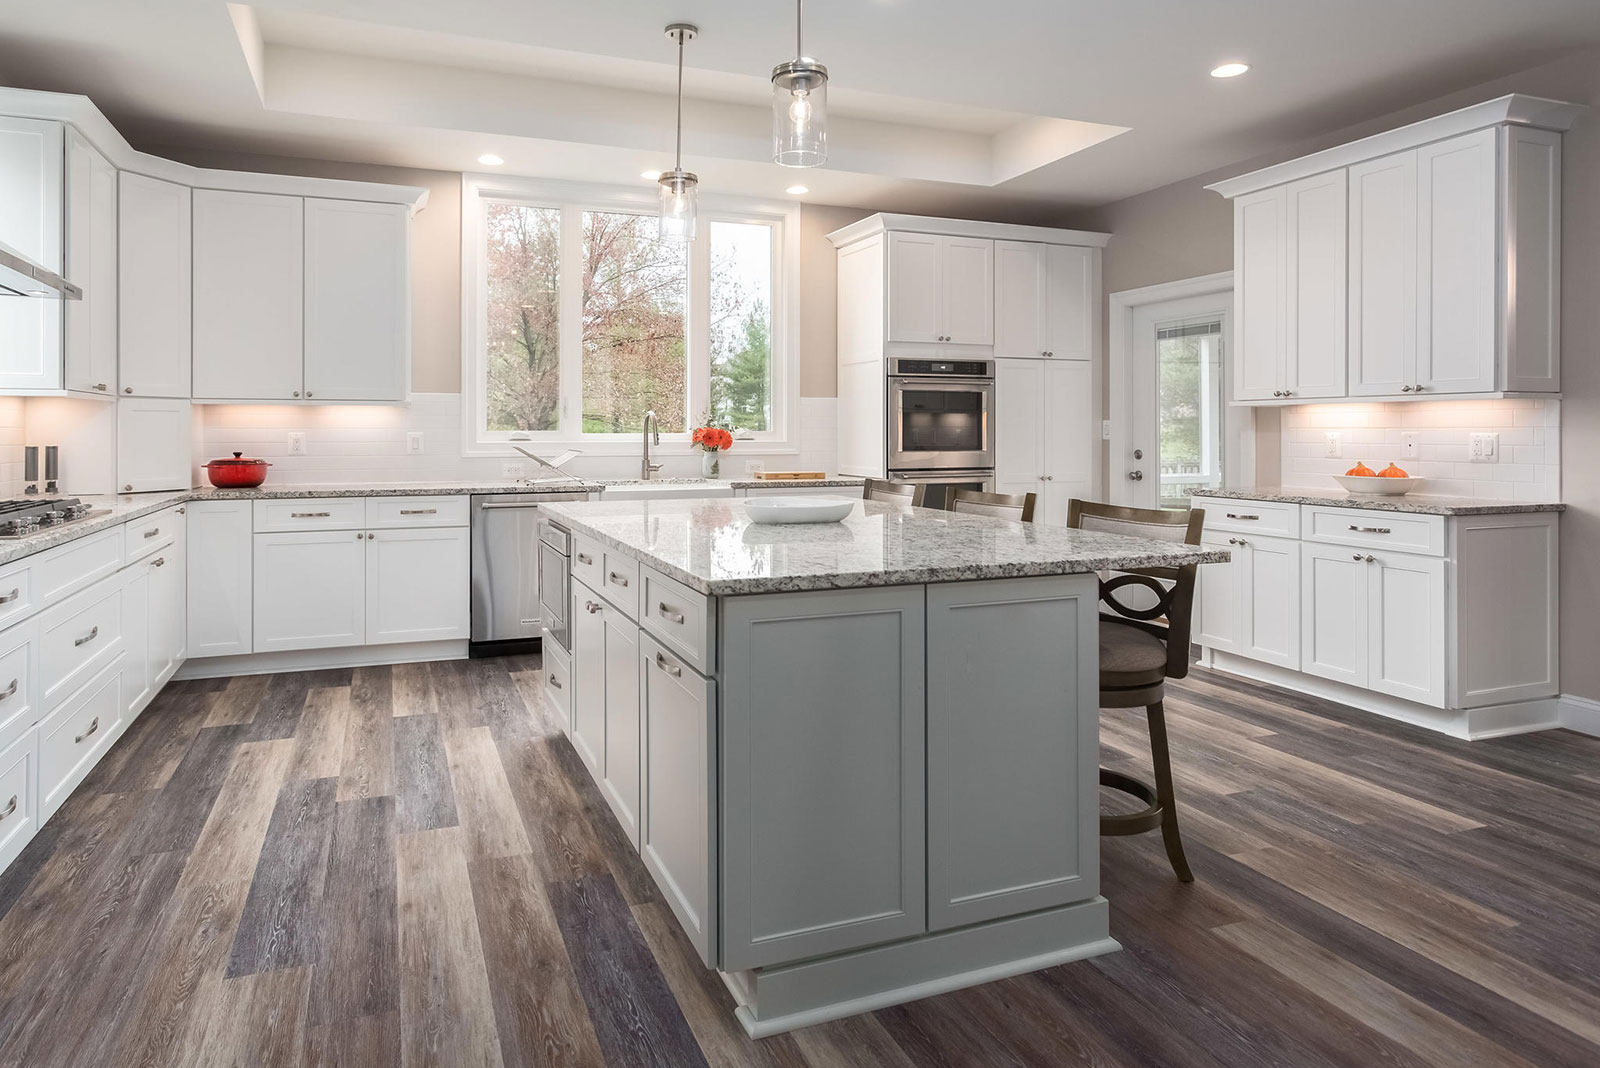 Reno of the Month: Kitchen Design Trends You Need to Know About ...